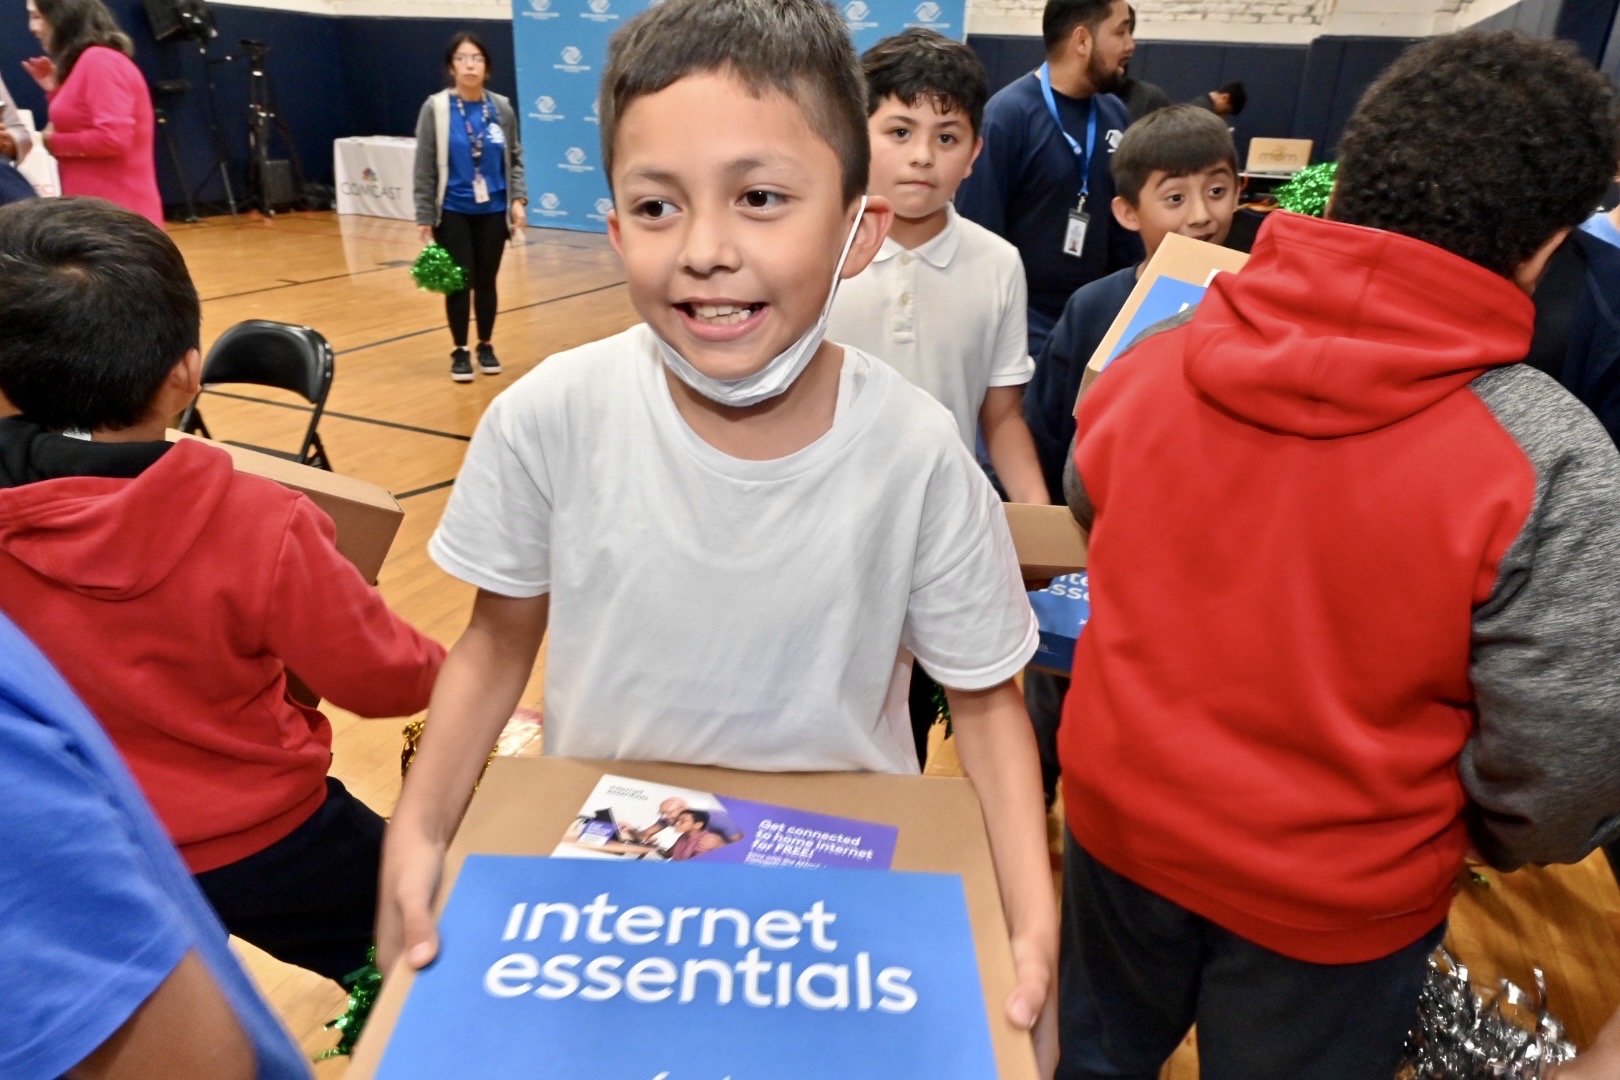 Young Boys & Club member celebrates his brand new laptop donated by Comcast in efforts to advance digital equity in Chicago.